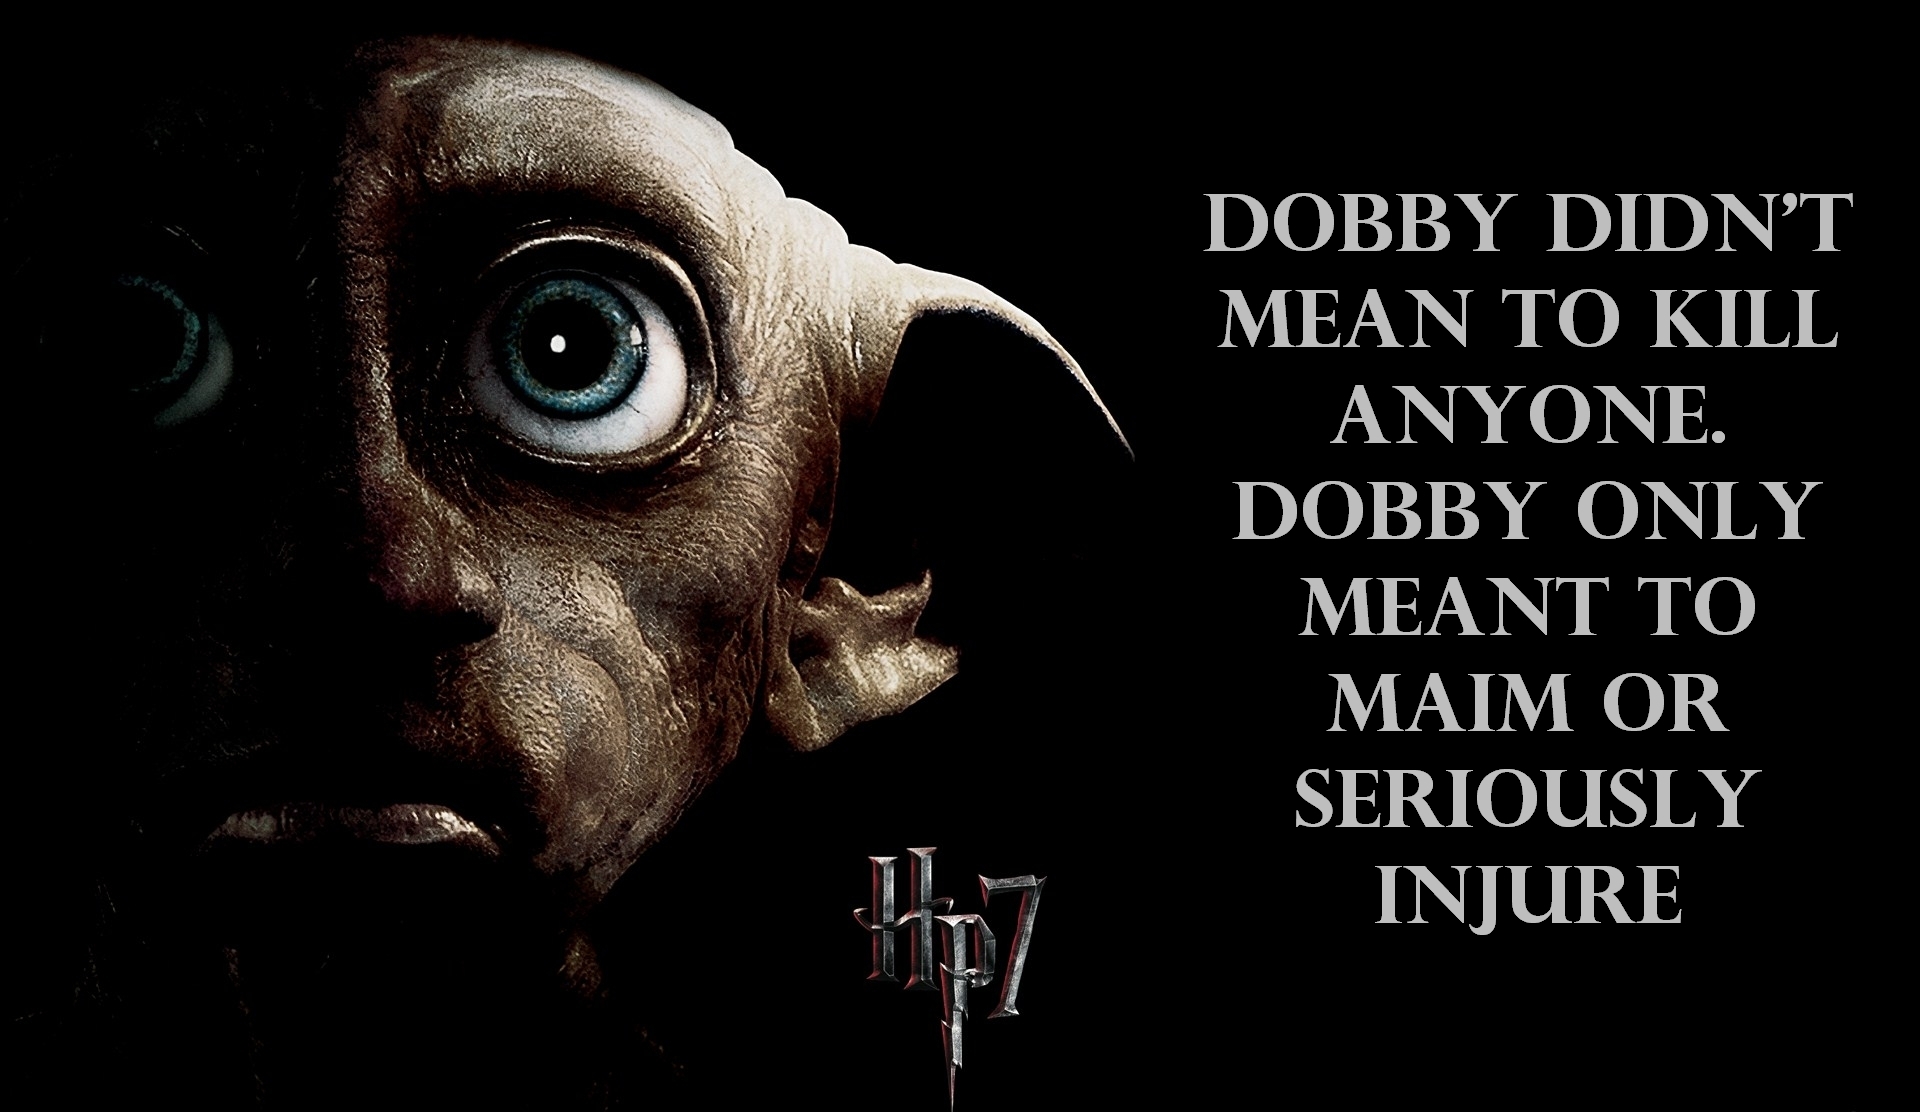 Dobby Harry Potter Quotes. QuotesGram